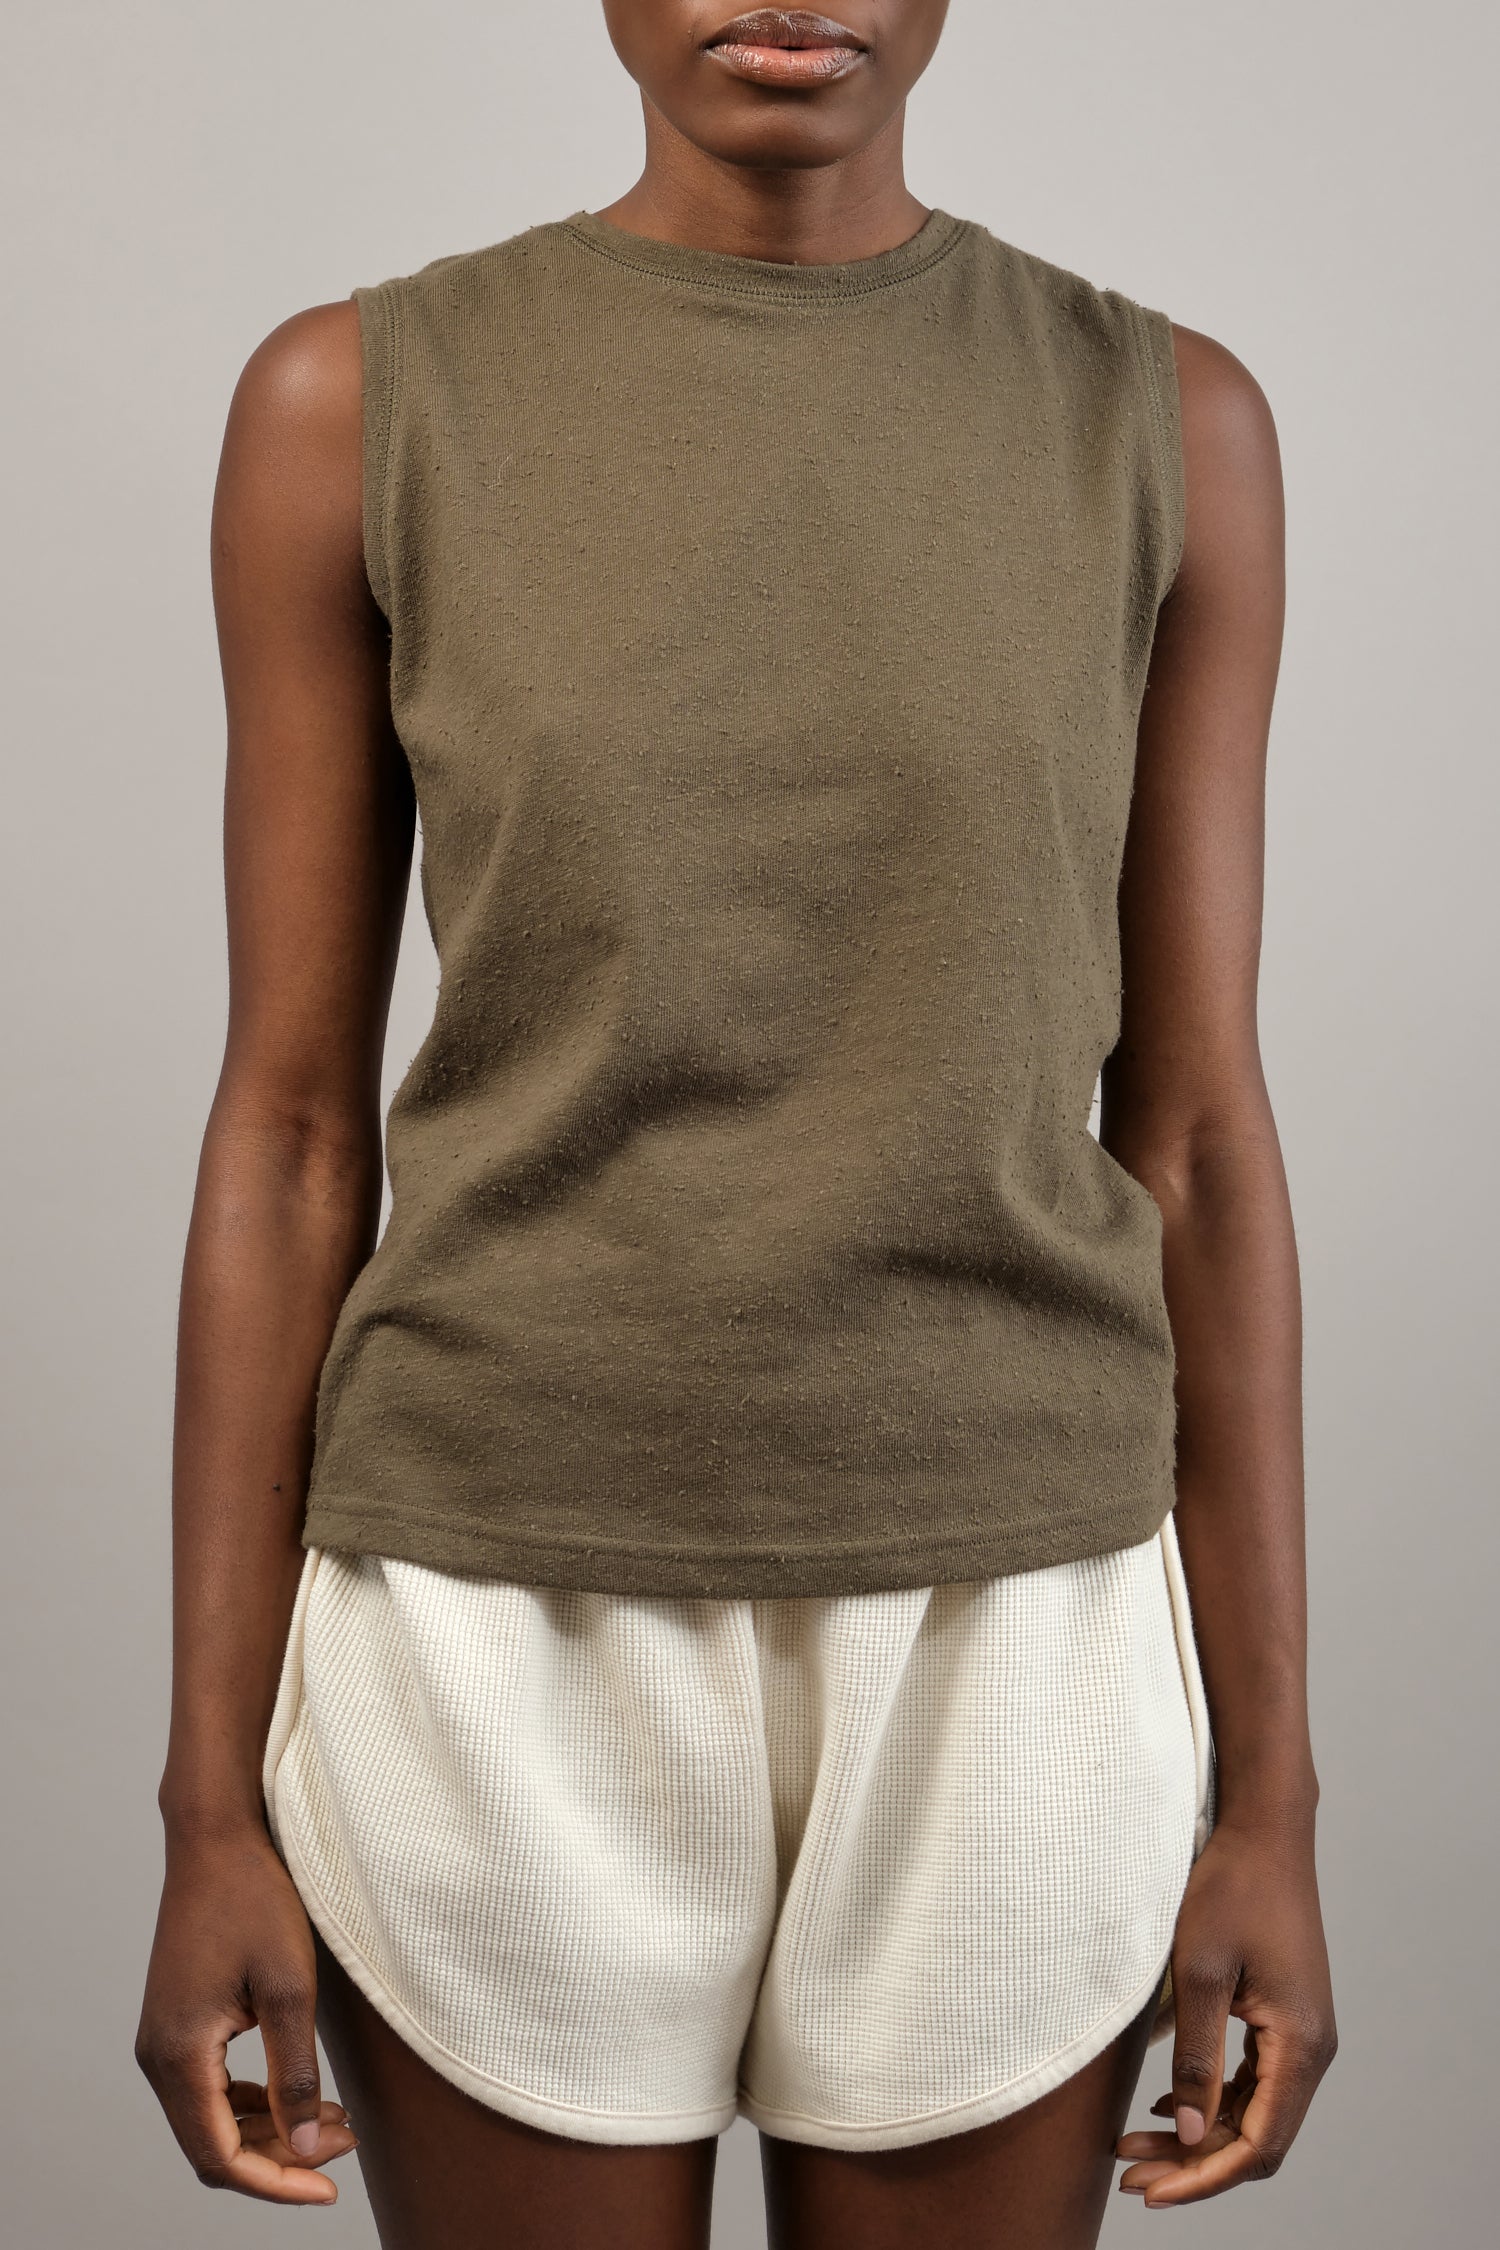 Signature Textured Linen Tank in Olive